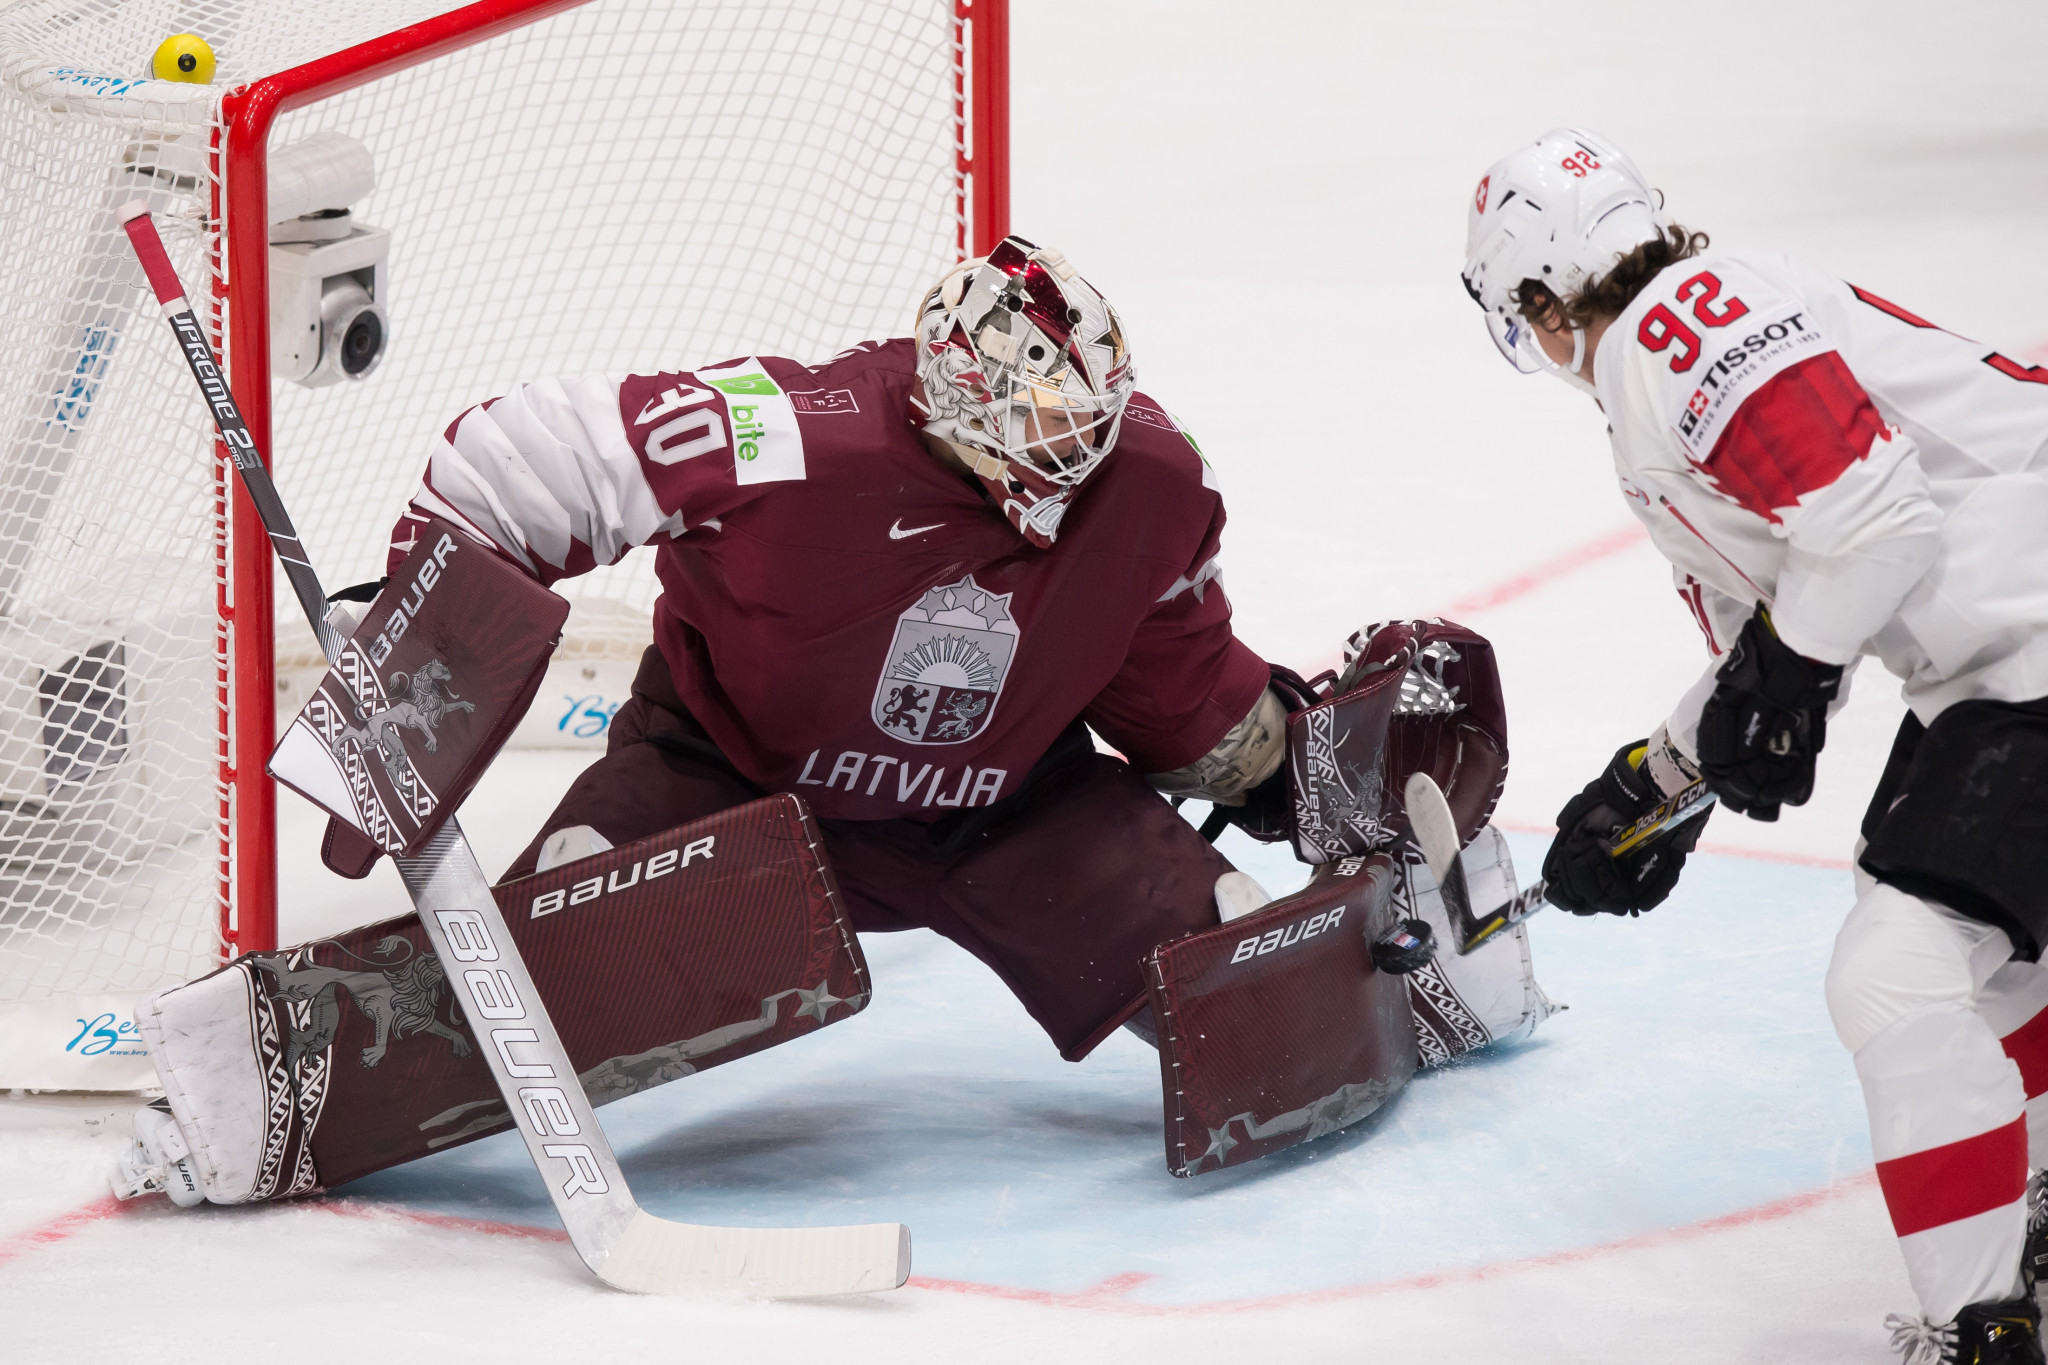 IIHF to discuss 2021 World Championships next month after Latvia threatens withdrawal